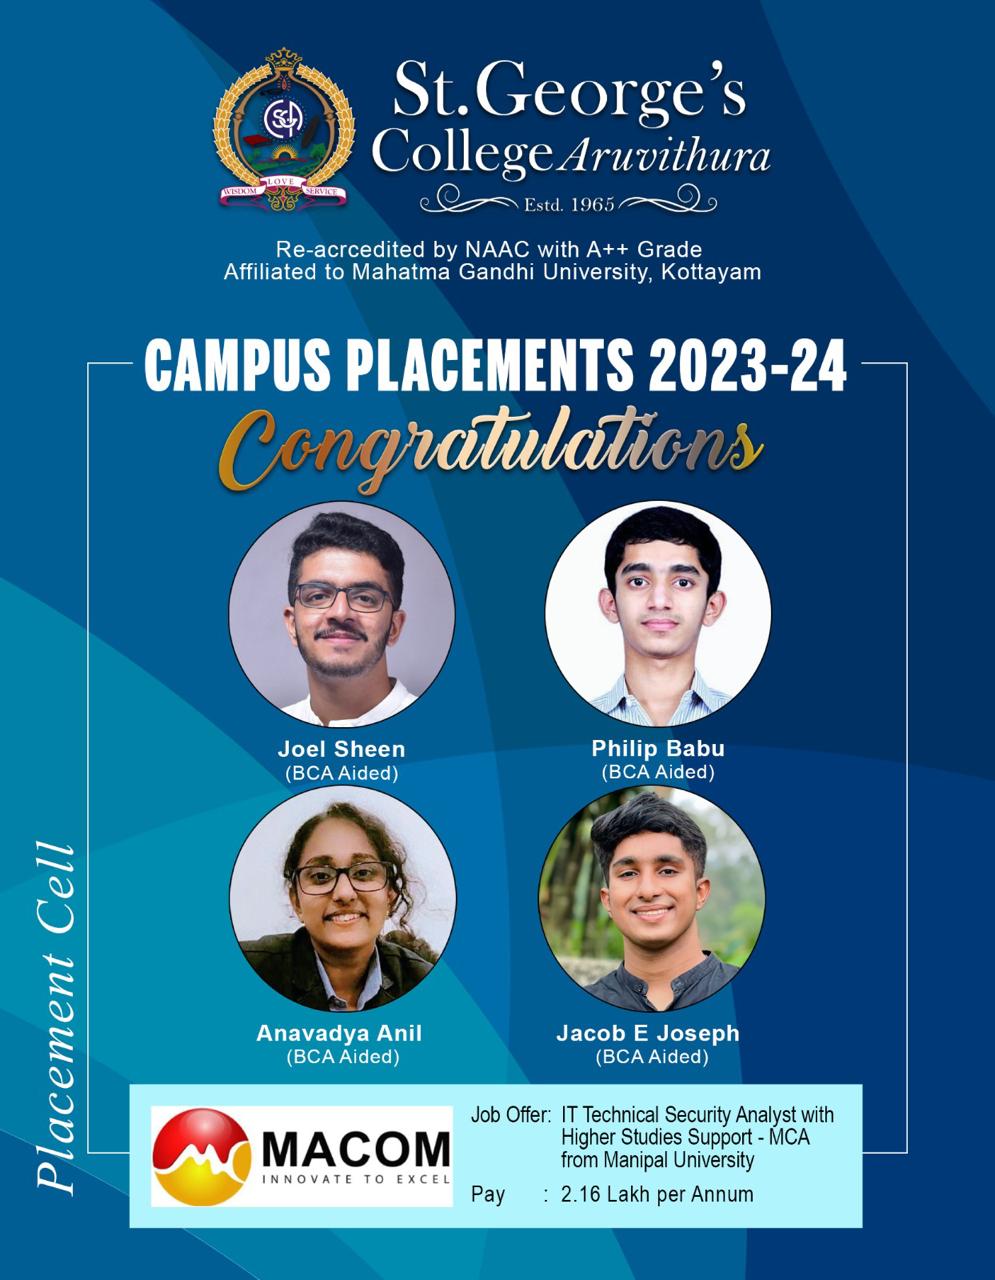 Placements 2023-24: MACOM